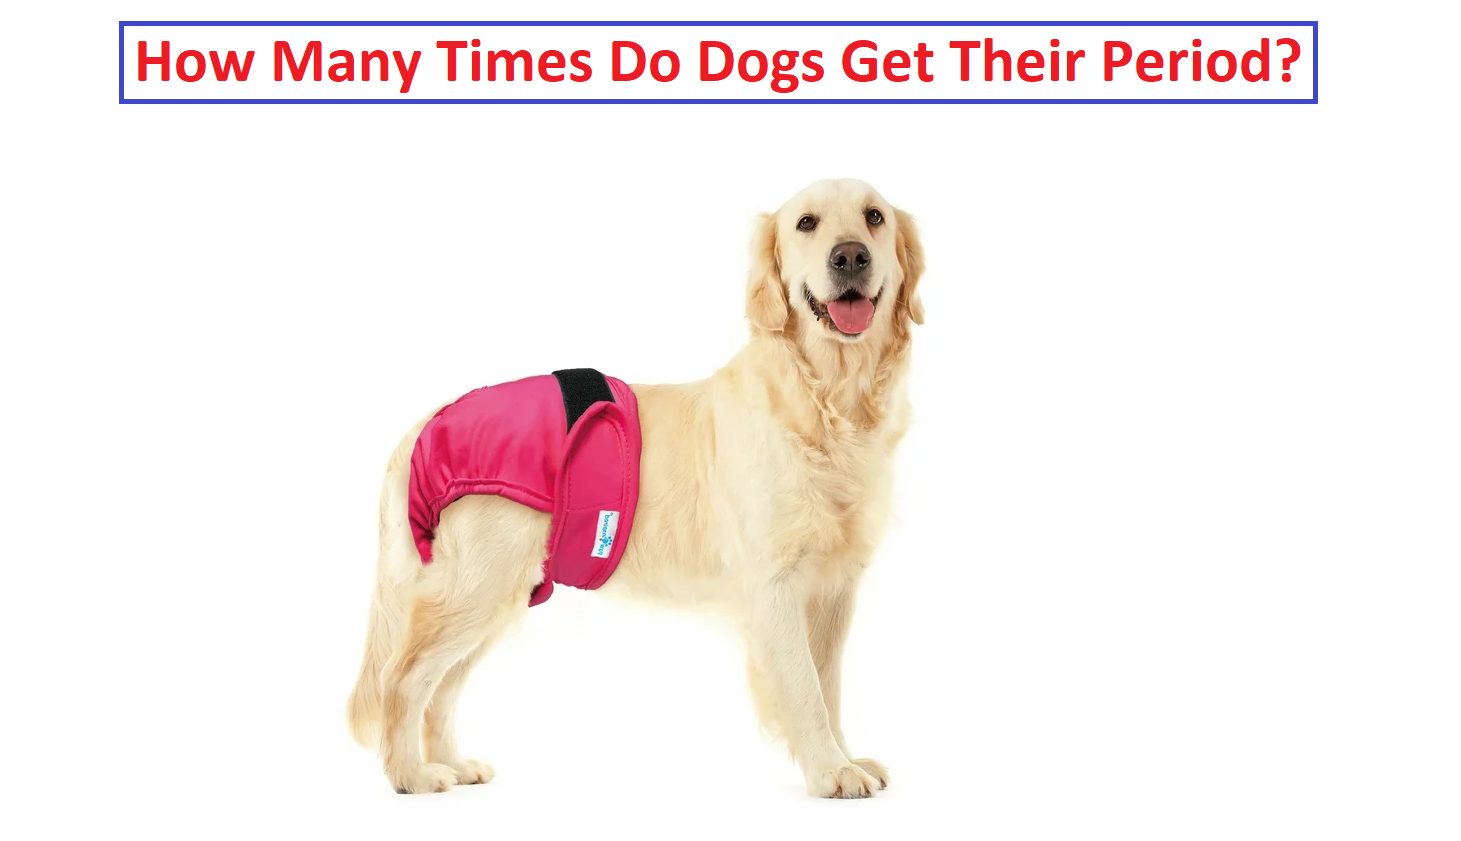 How many times do dogs get their period?